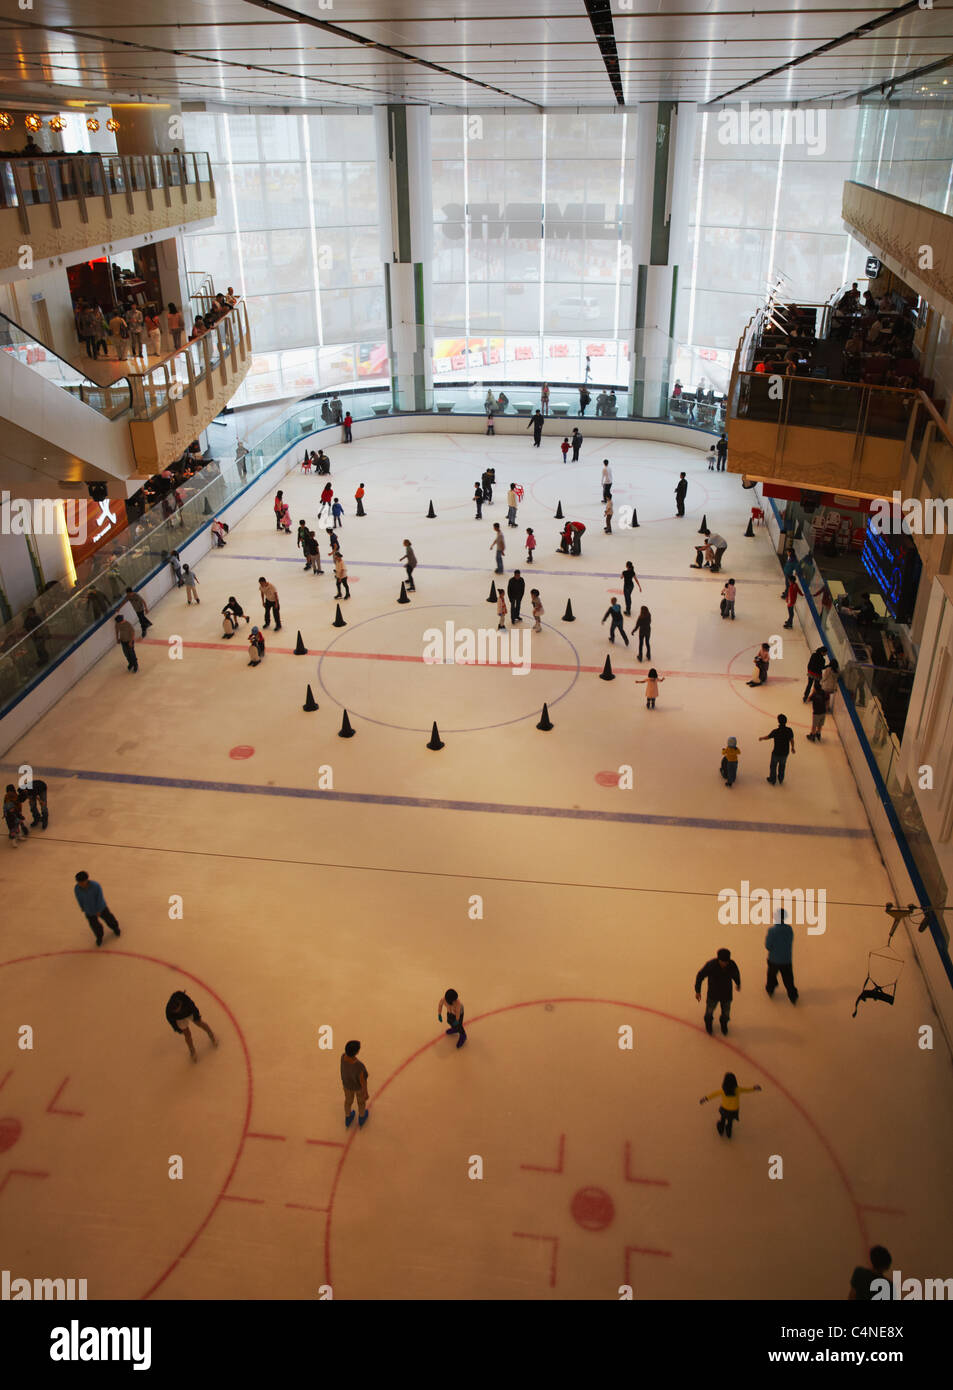 Ice rink in Elements mall, Kowloon Station, West Kowloon, Hong Kong, China Stock Photo